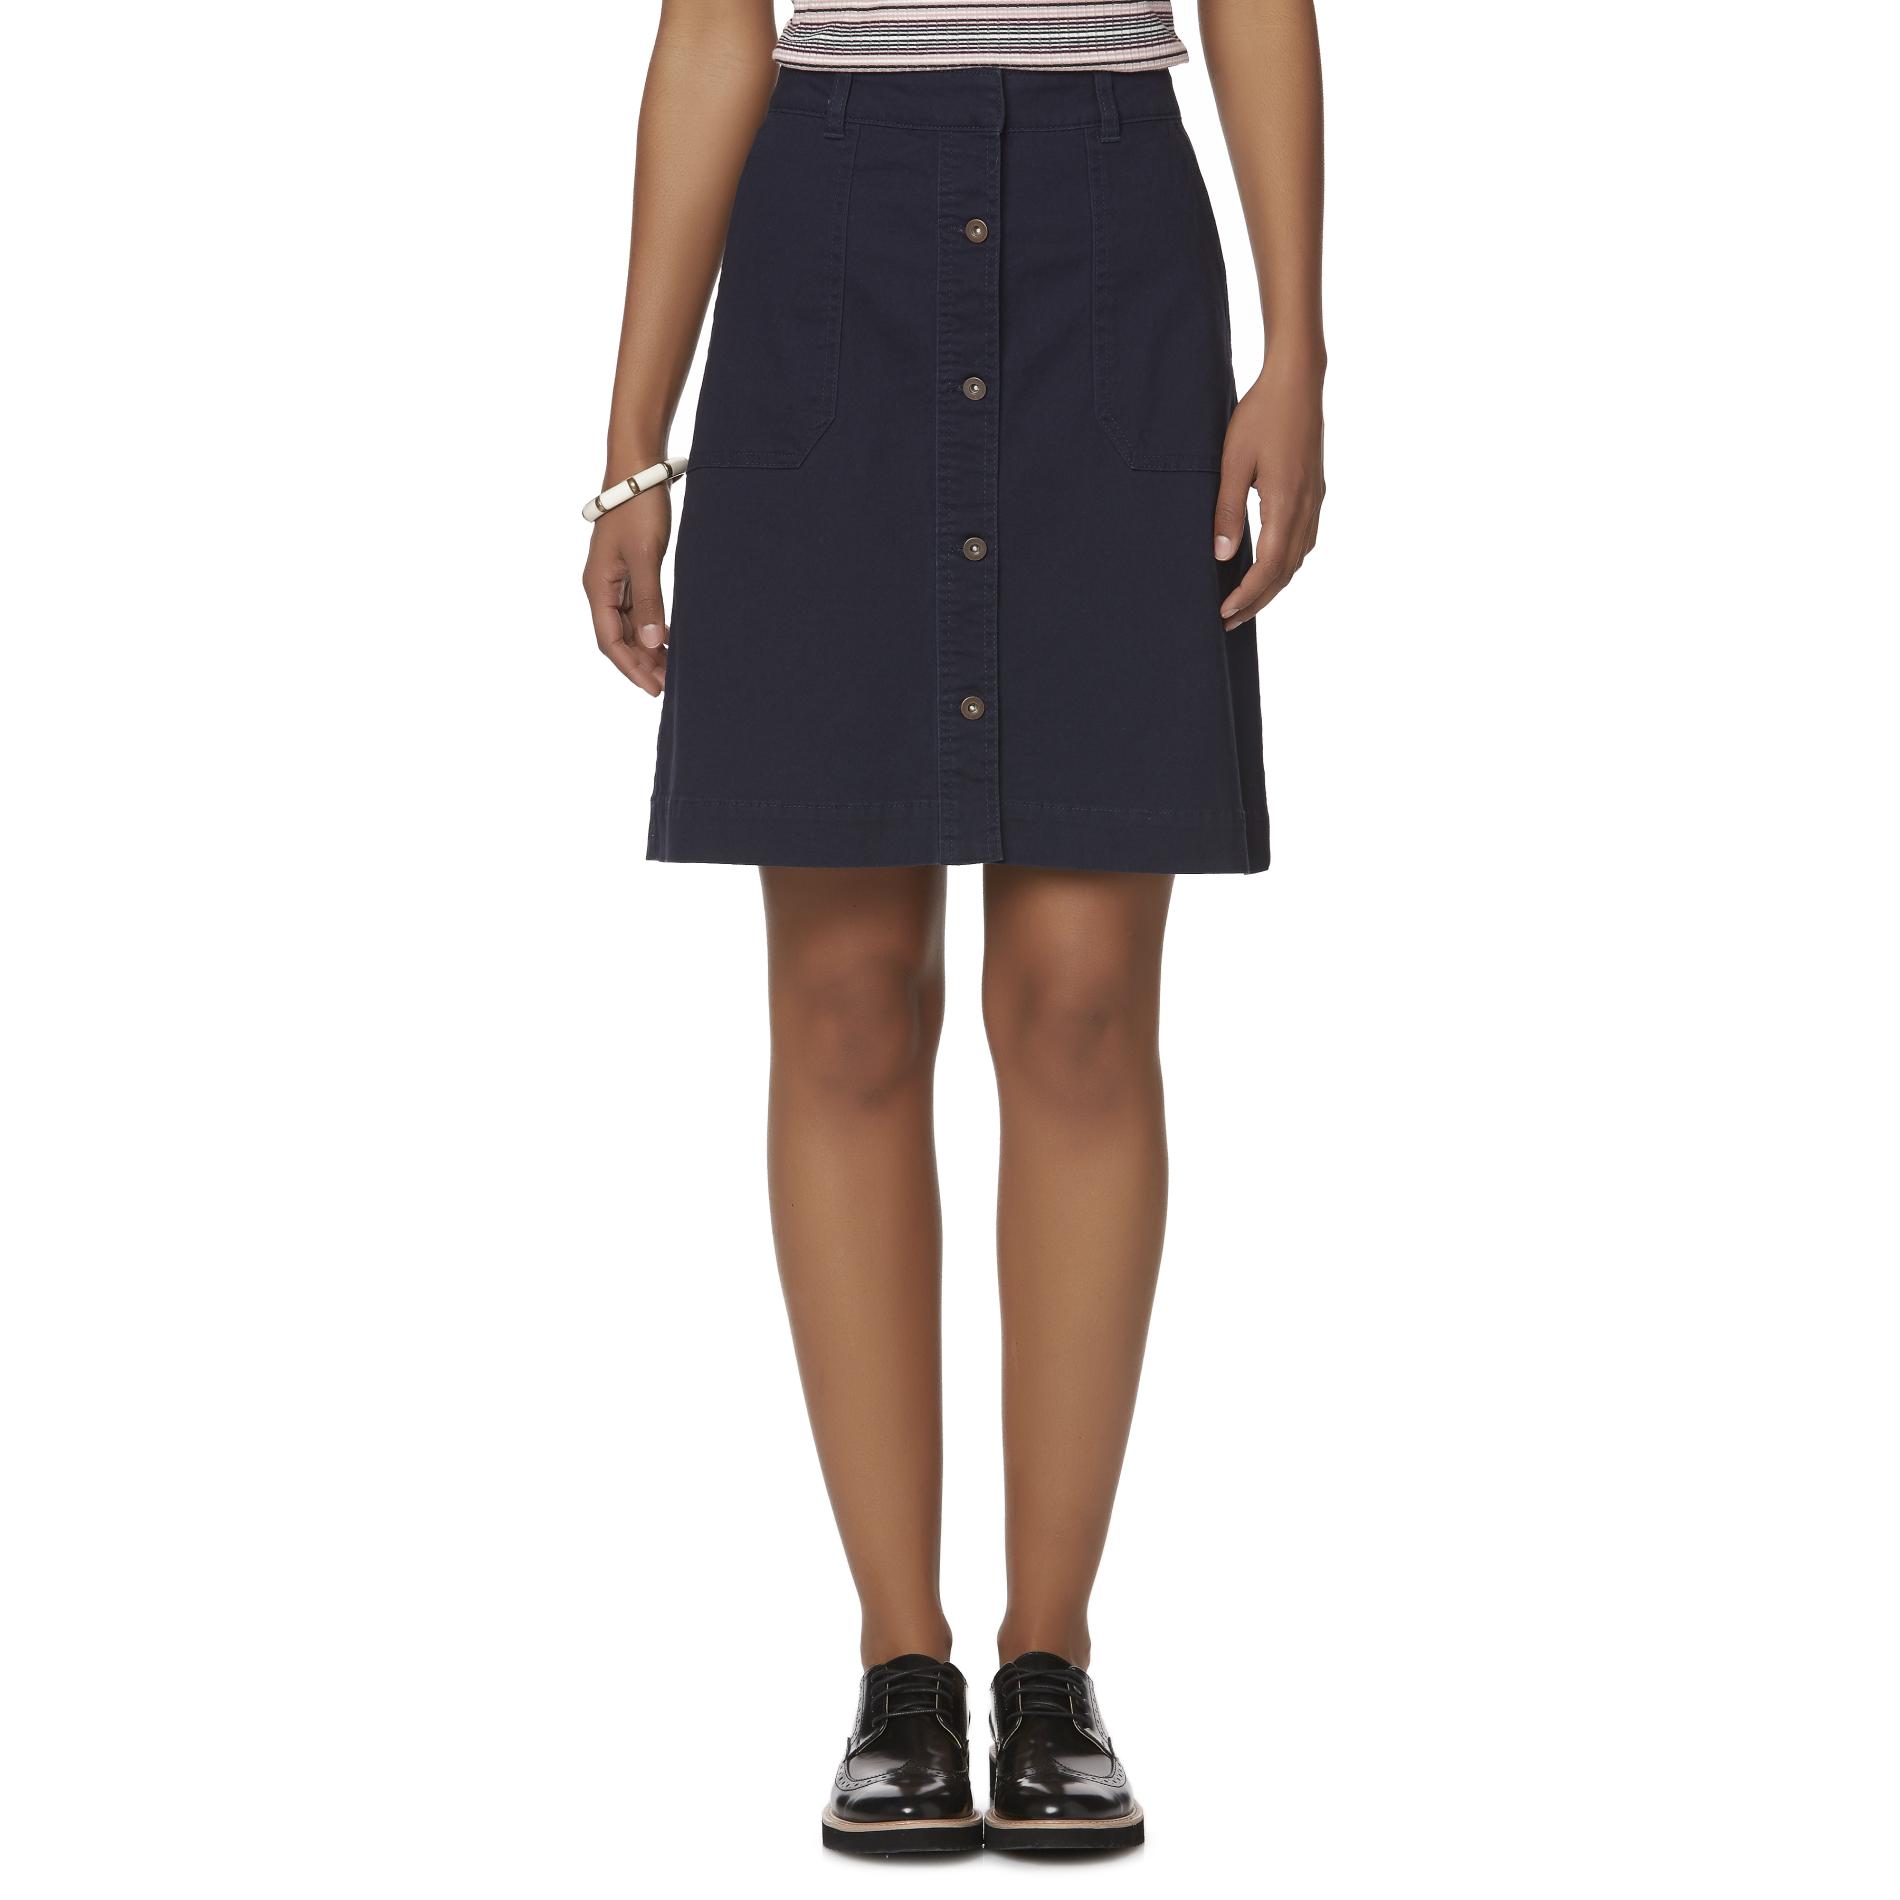 Simply Styled Women's Button-Front Skirt